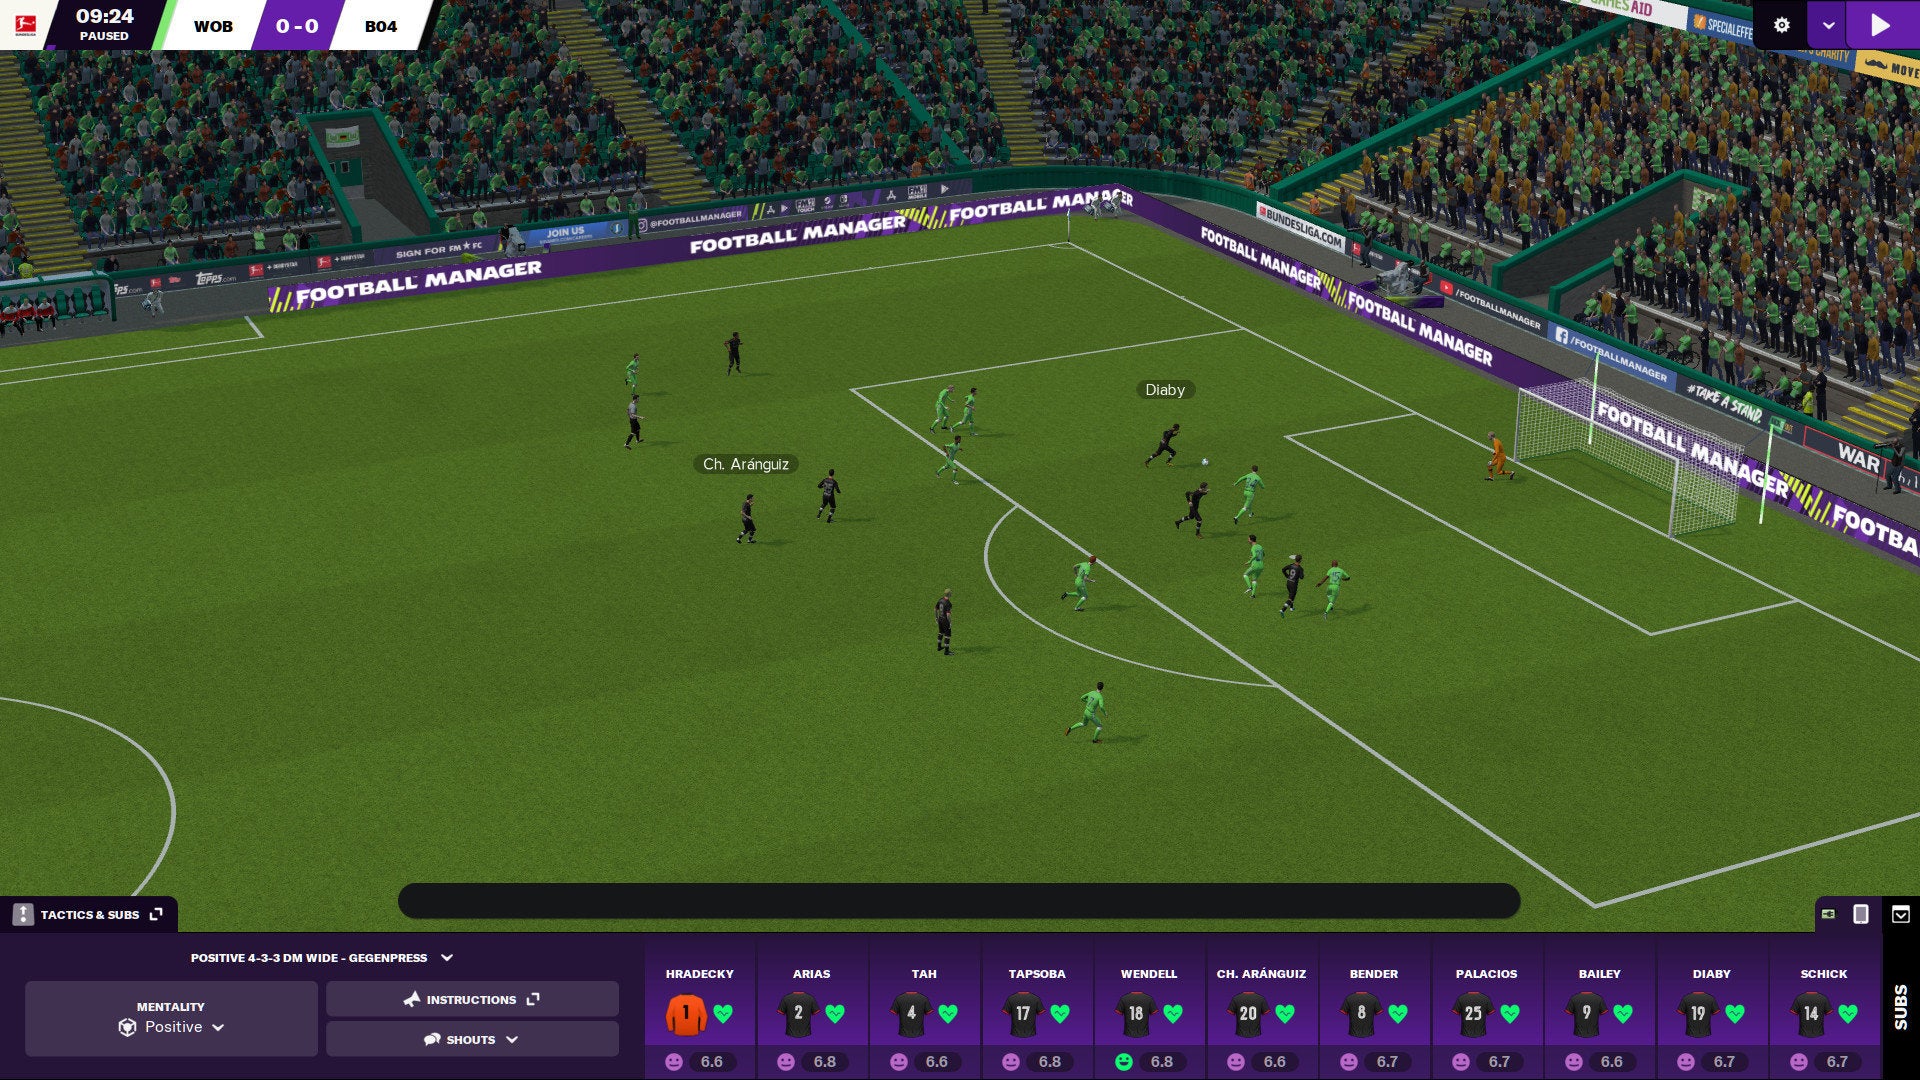 Image for Football Manager 2021 is out now, reflecting some of the pandemic's effects on footie